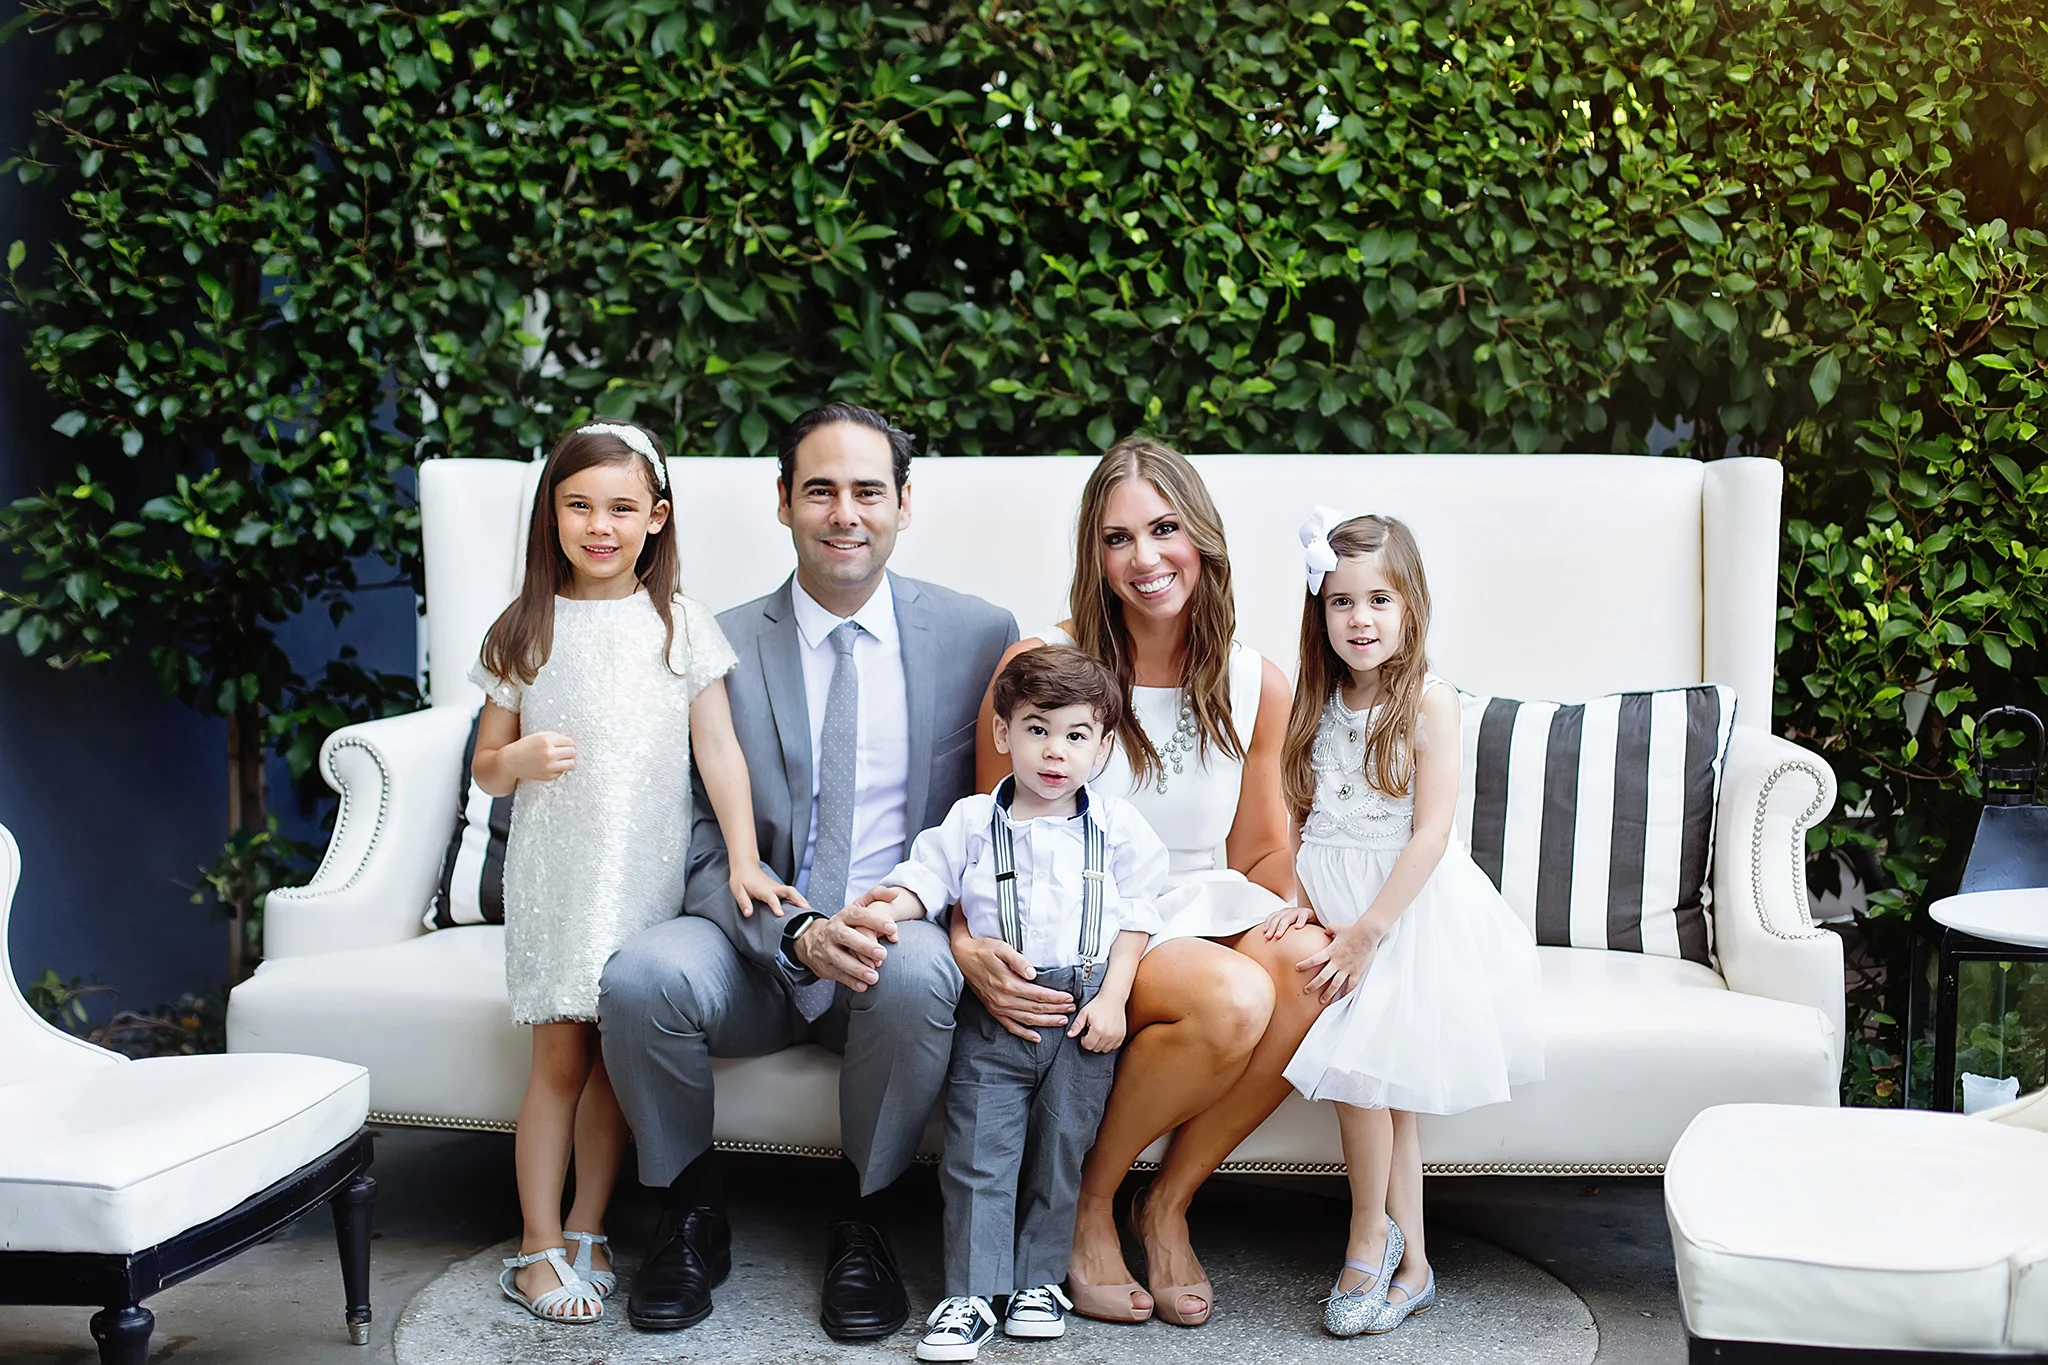 Find a family photographer that fits your personal style!